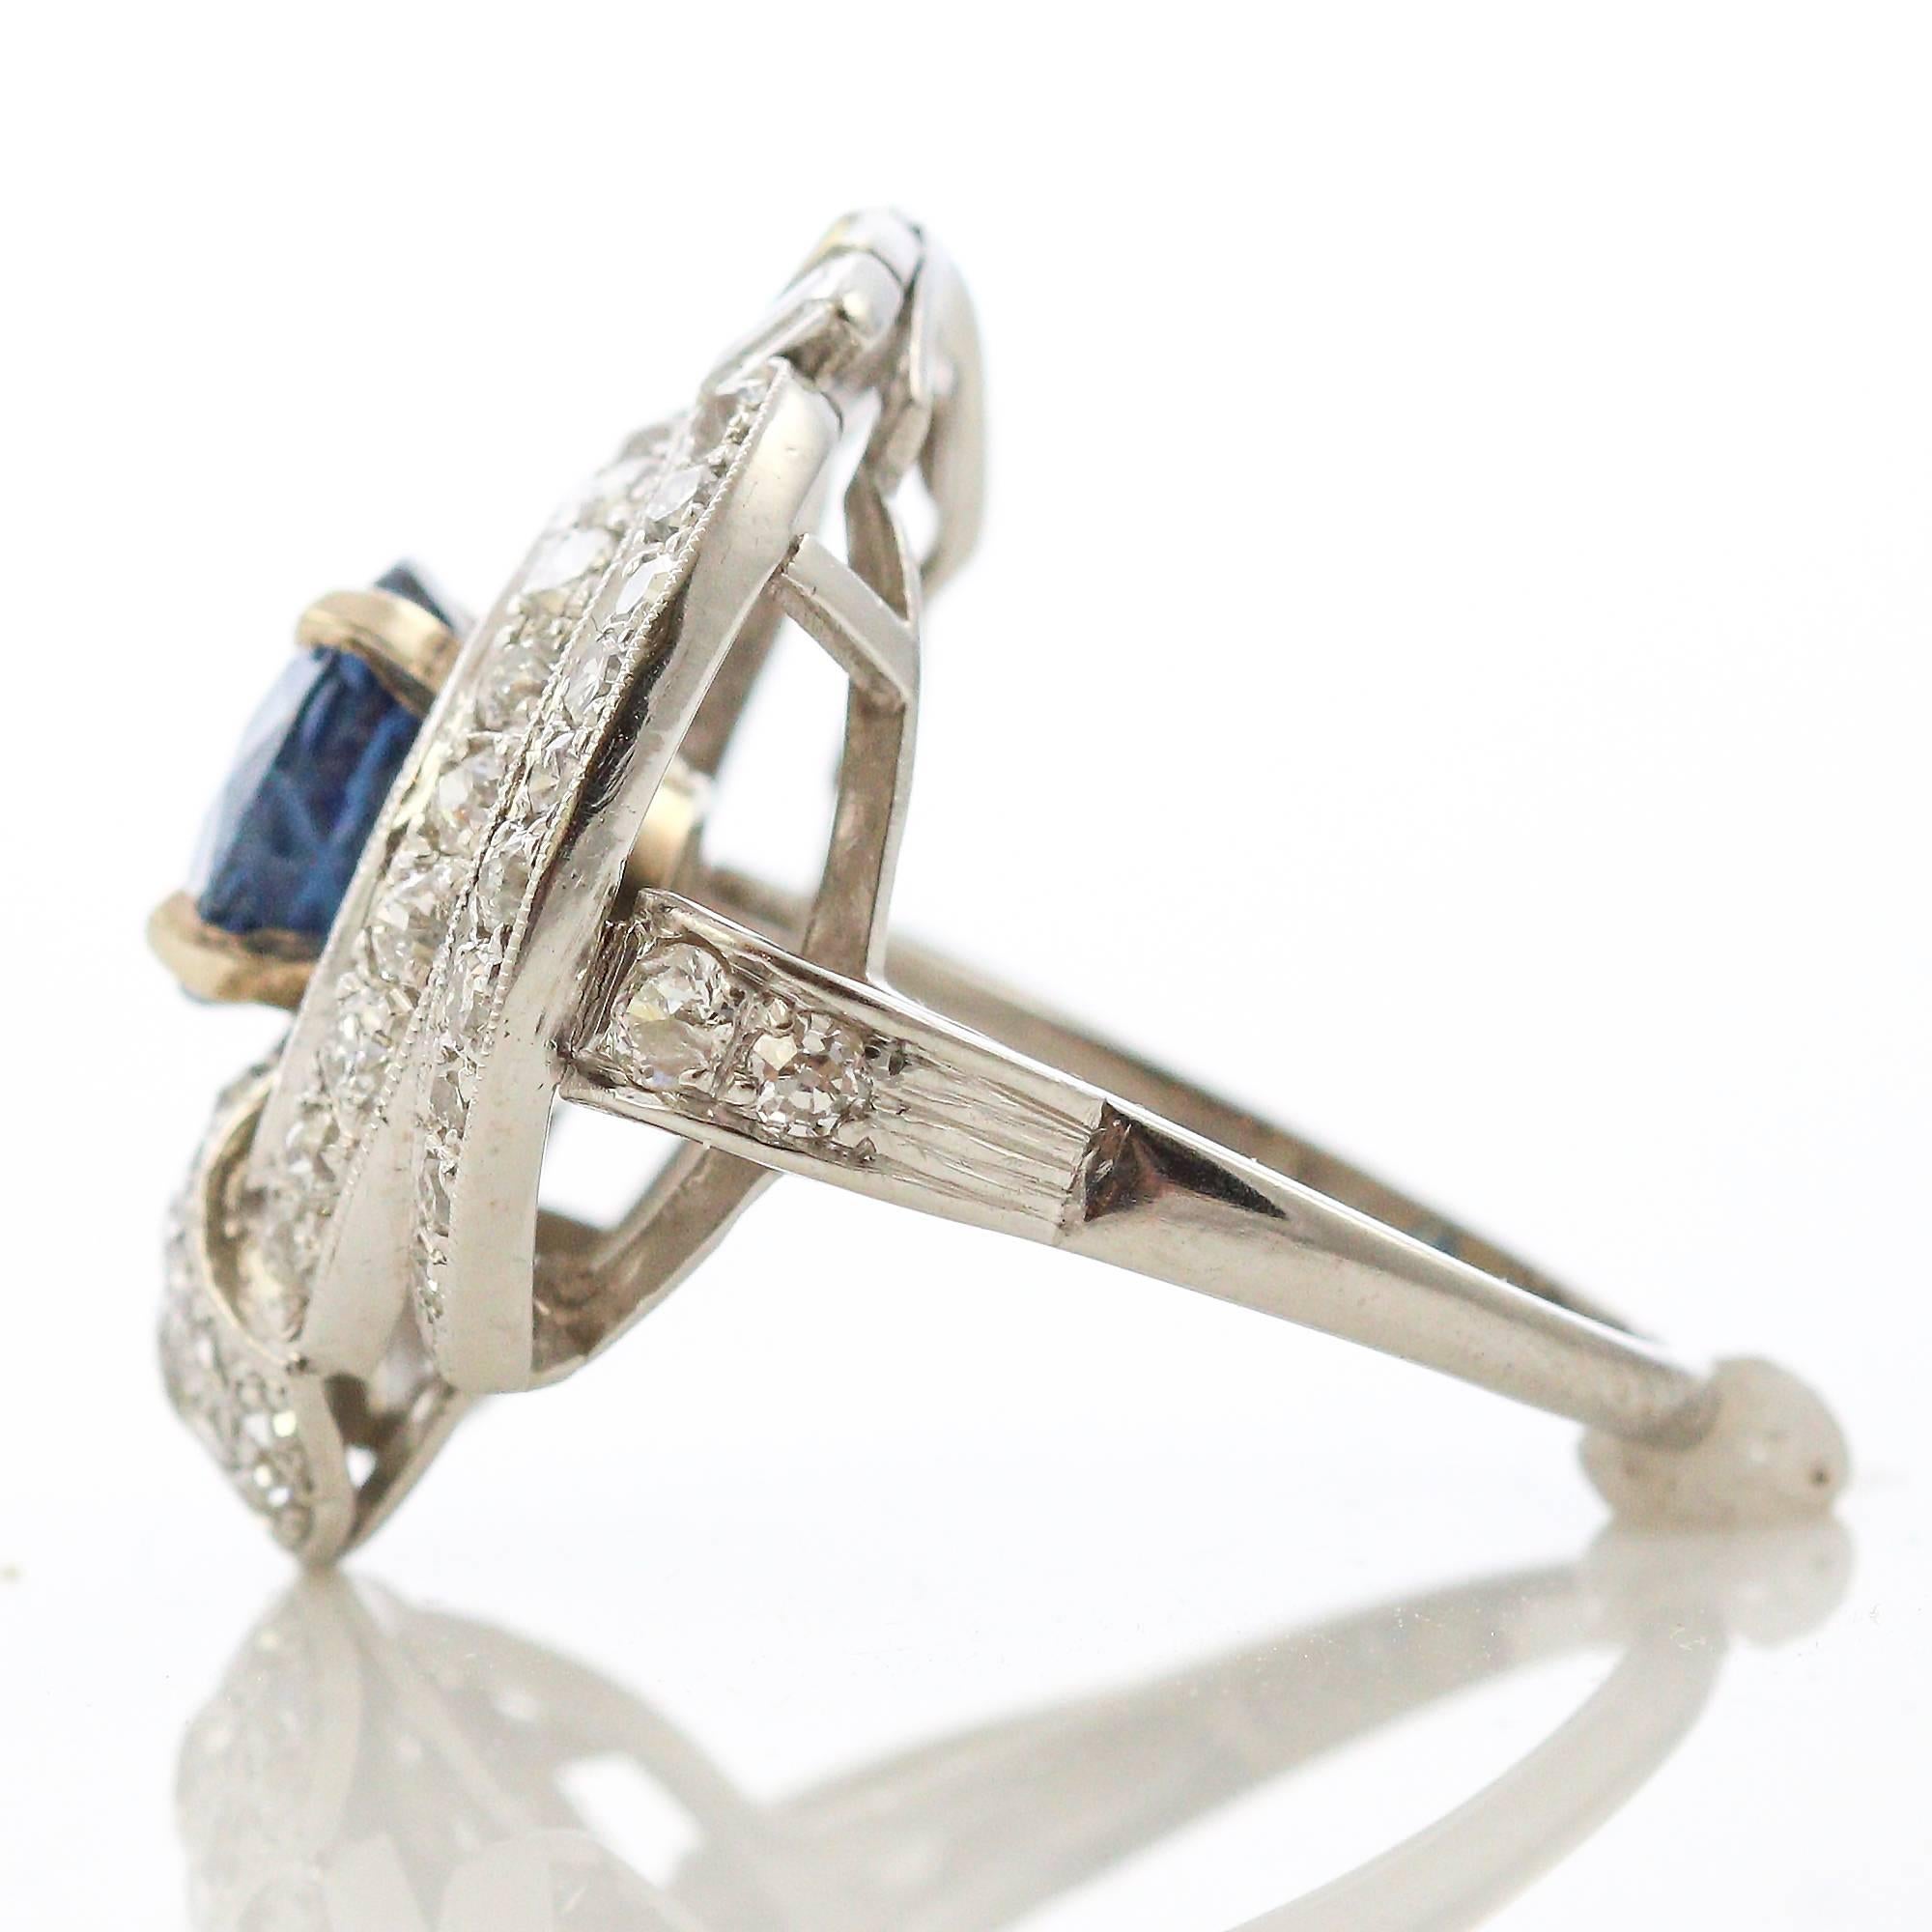 This fun, funky ring centers a round blue sapphire (apx 2.00ct) set in platinum and surrounded by a design of 66 old European cut and 6 baguette cut diamonds, which weigh an approximate total of 2.00ctw and grade as 